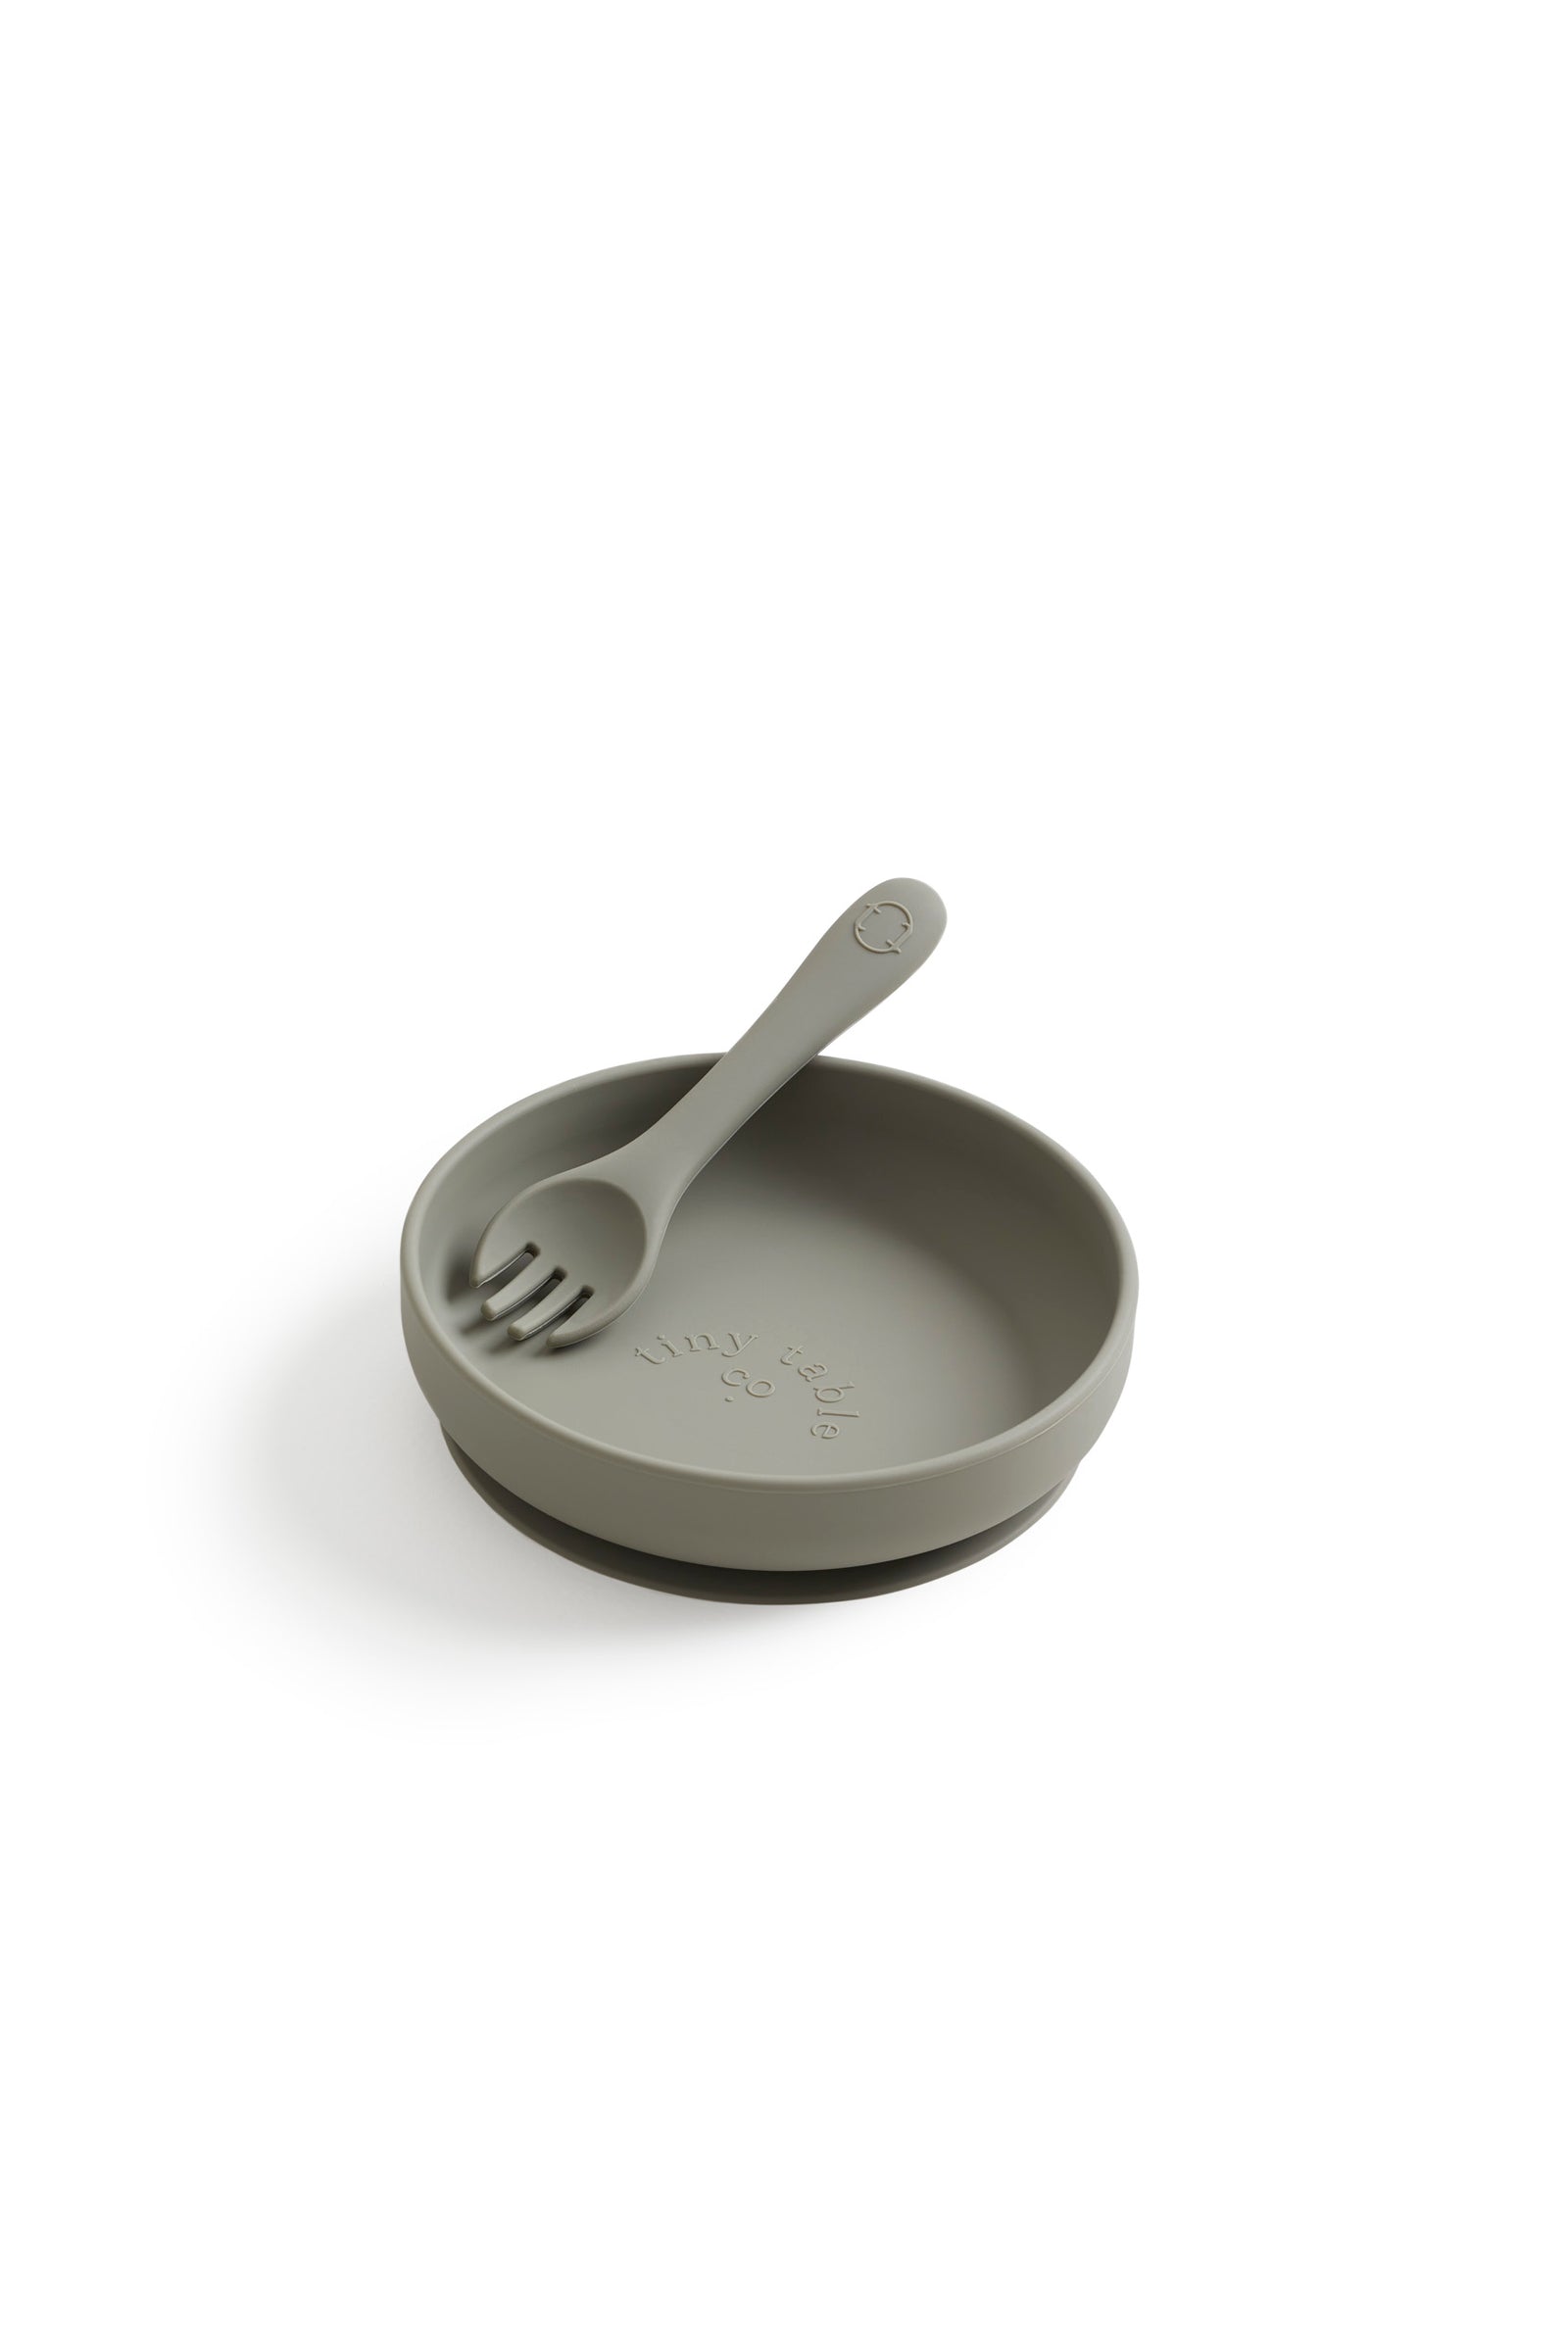 tiny table co. plate and spork set